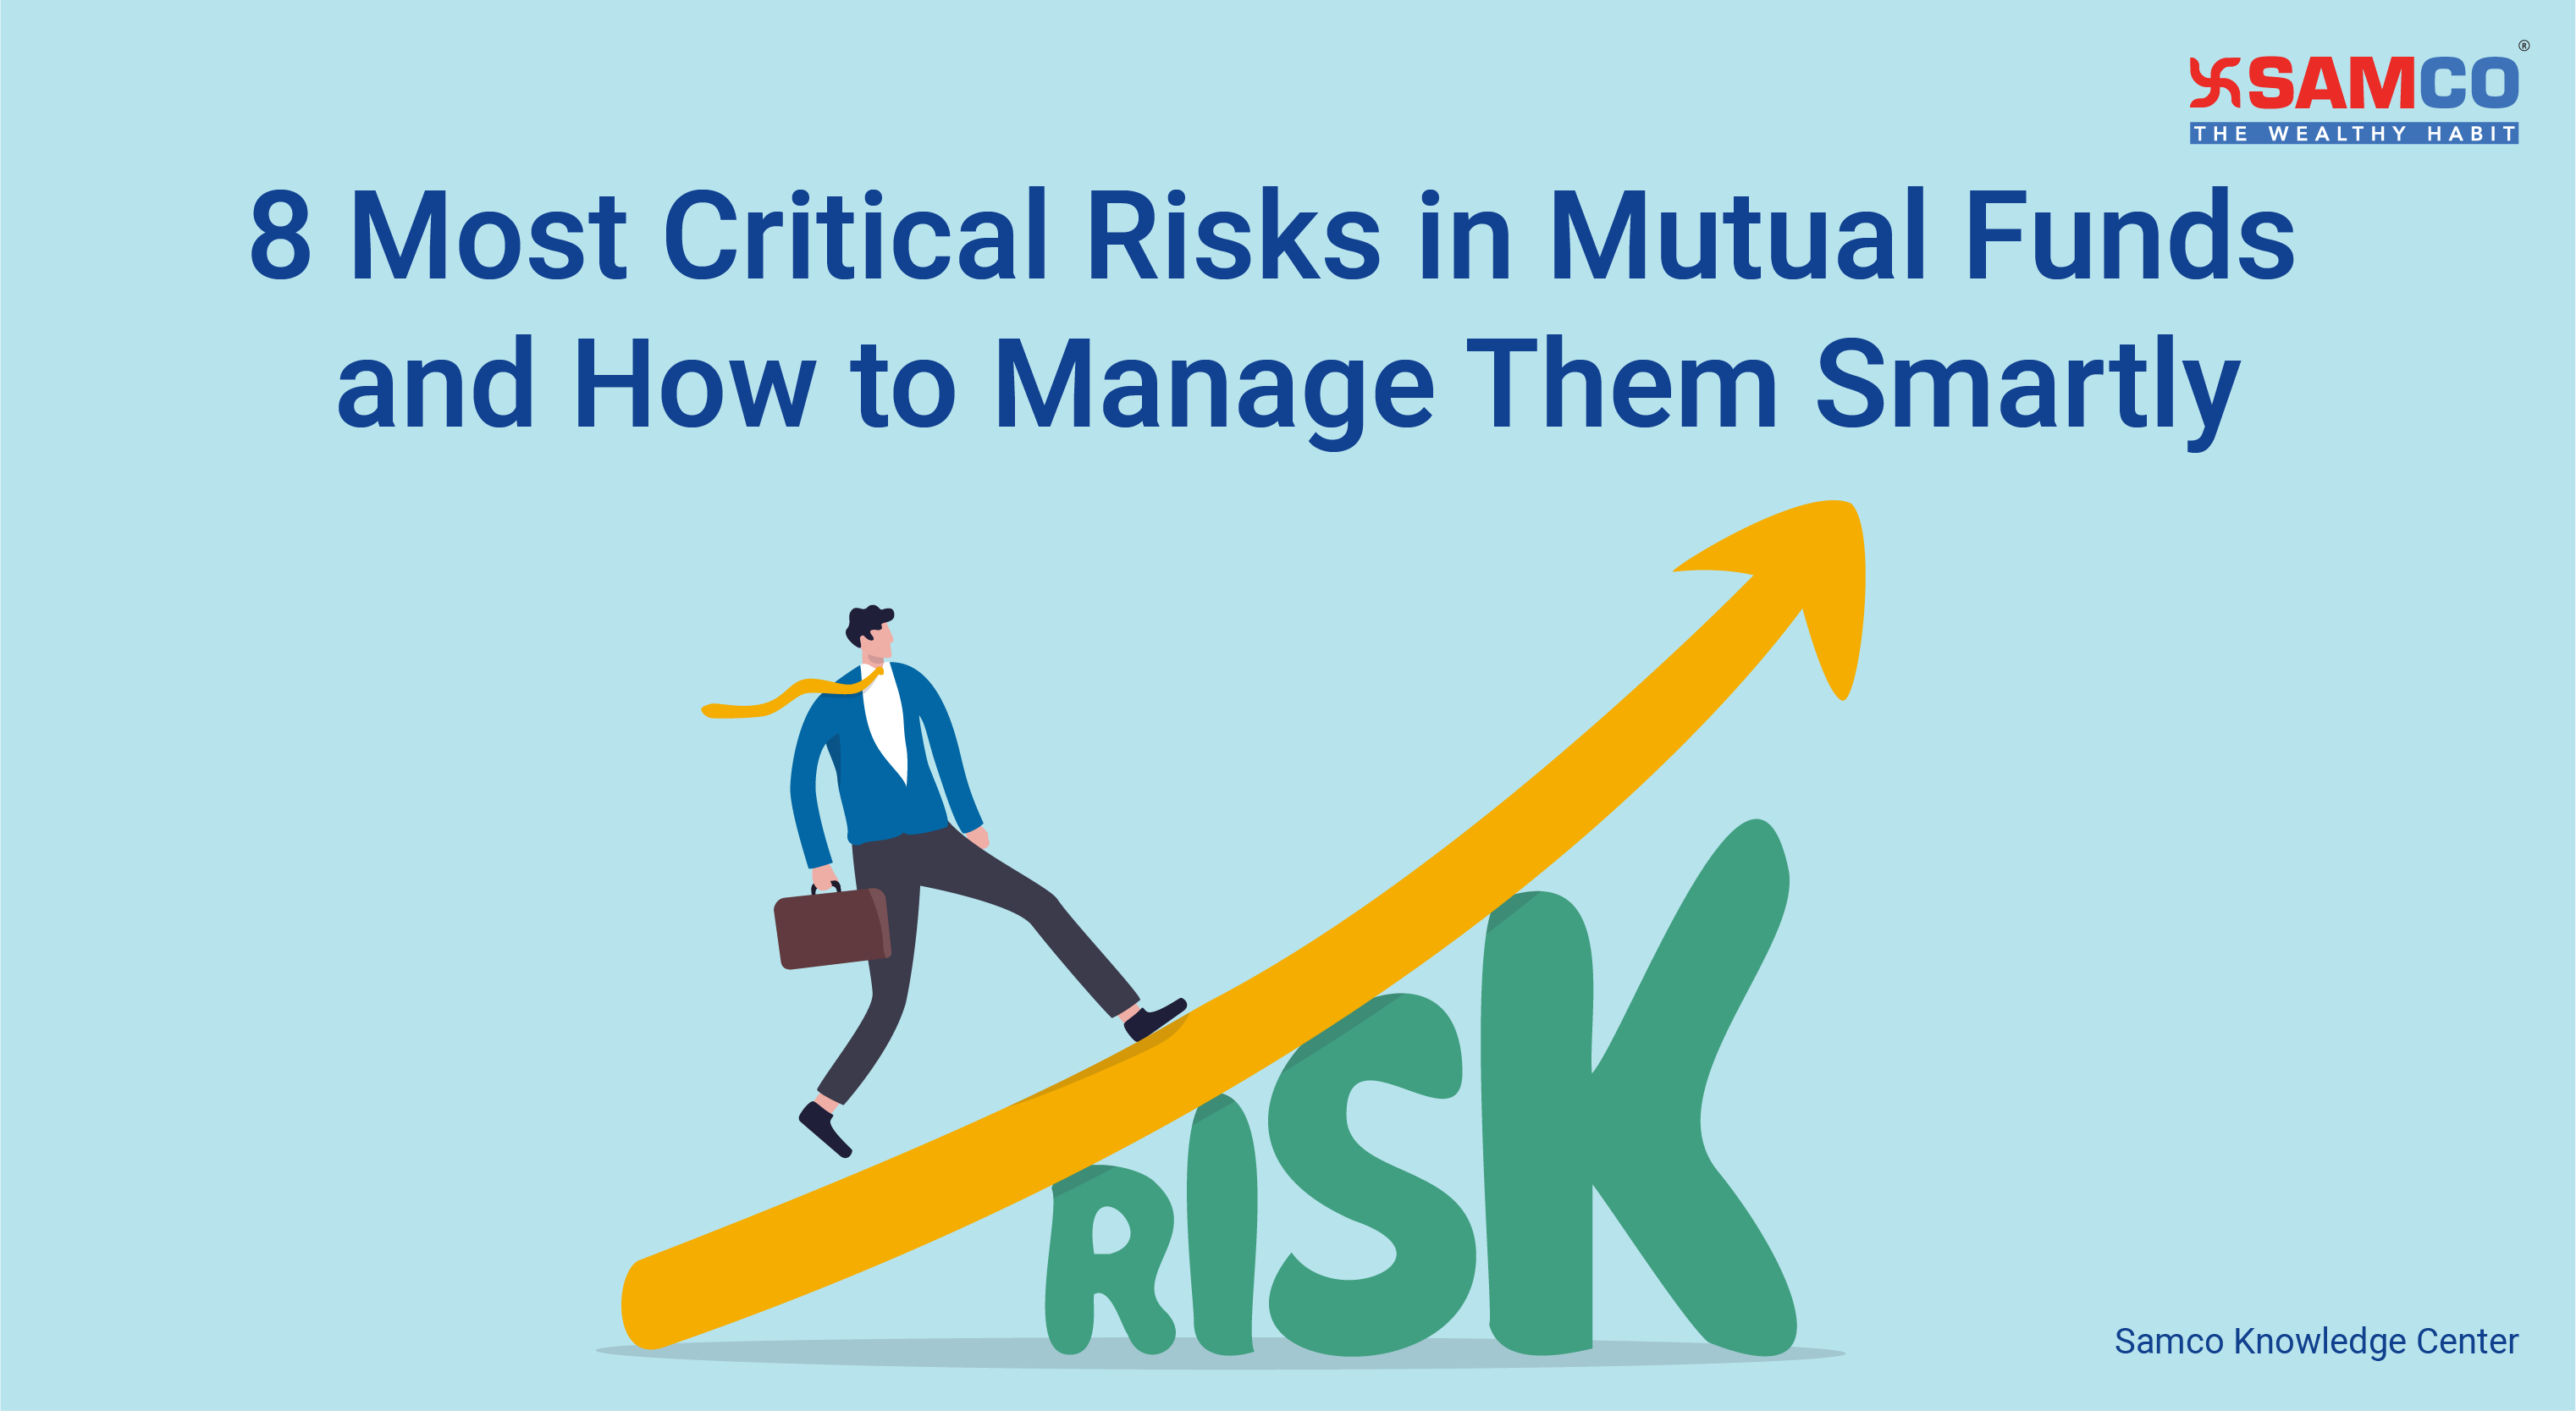 8 Most Critical Risks in Mutual Funds